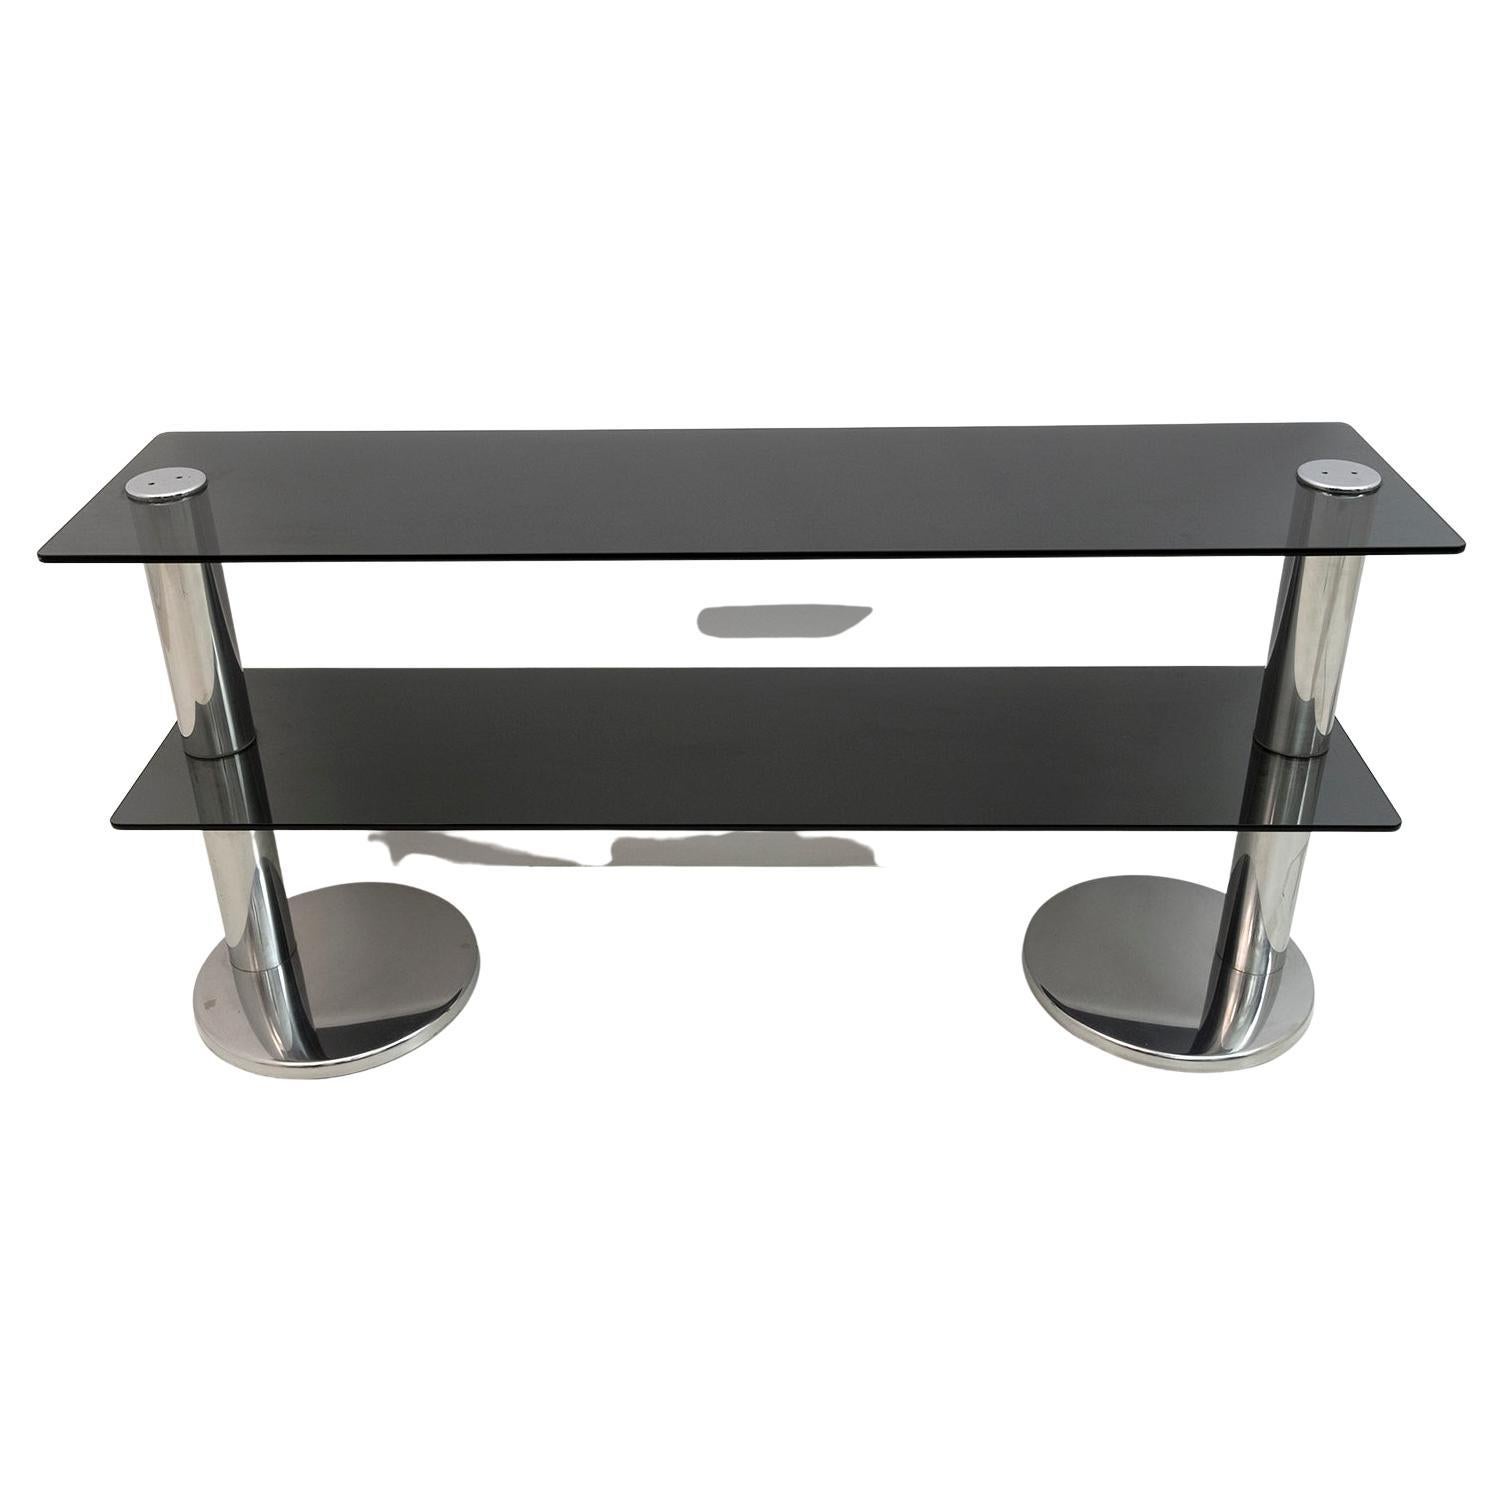 Mid-century Modern Italian Chromed Steel and Smoked Glass Console, 1970s For Sale